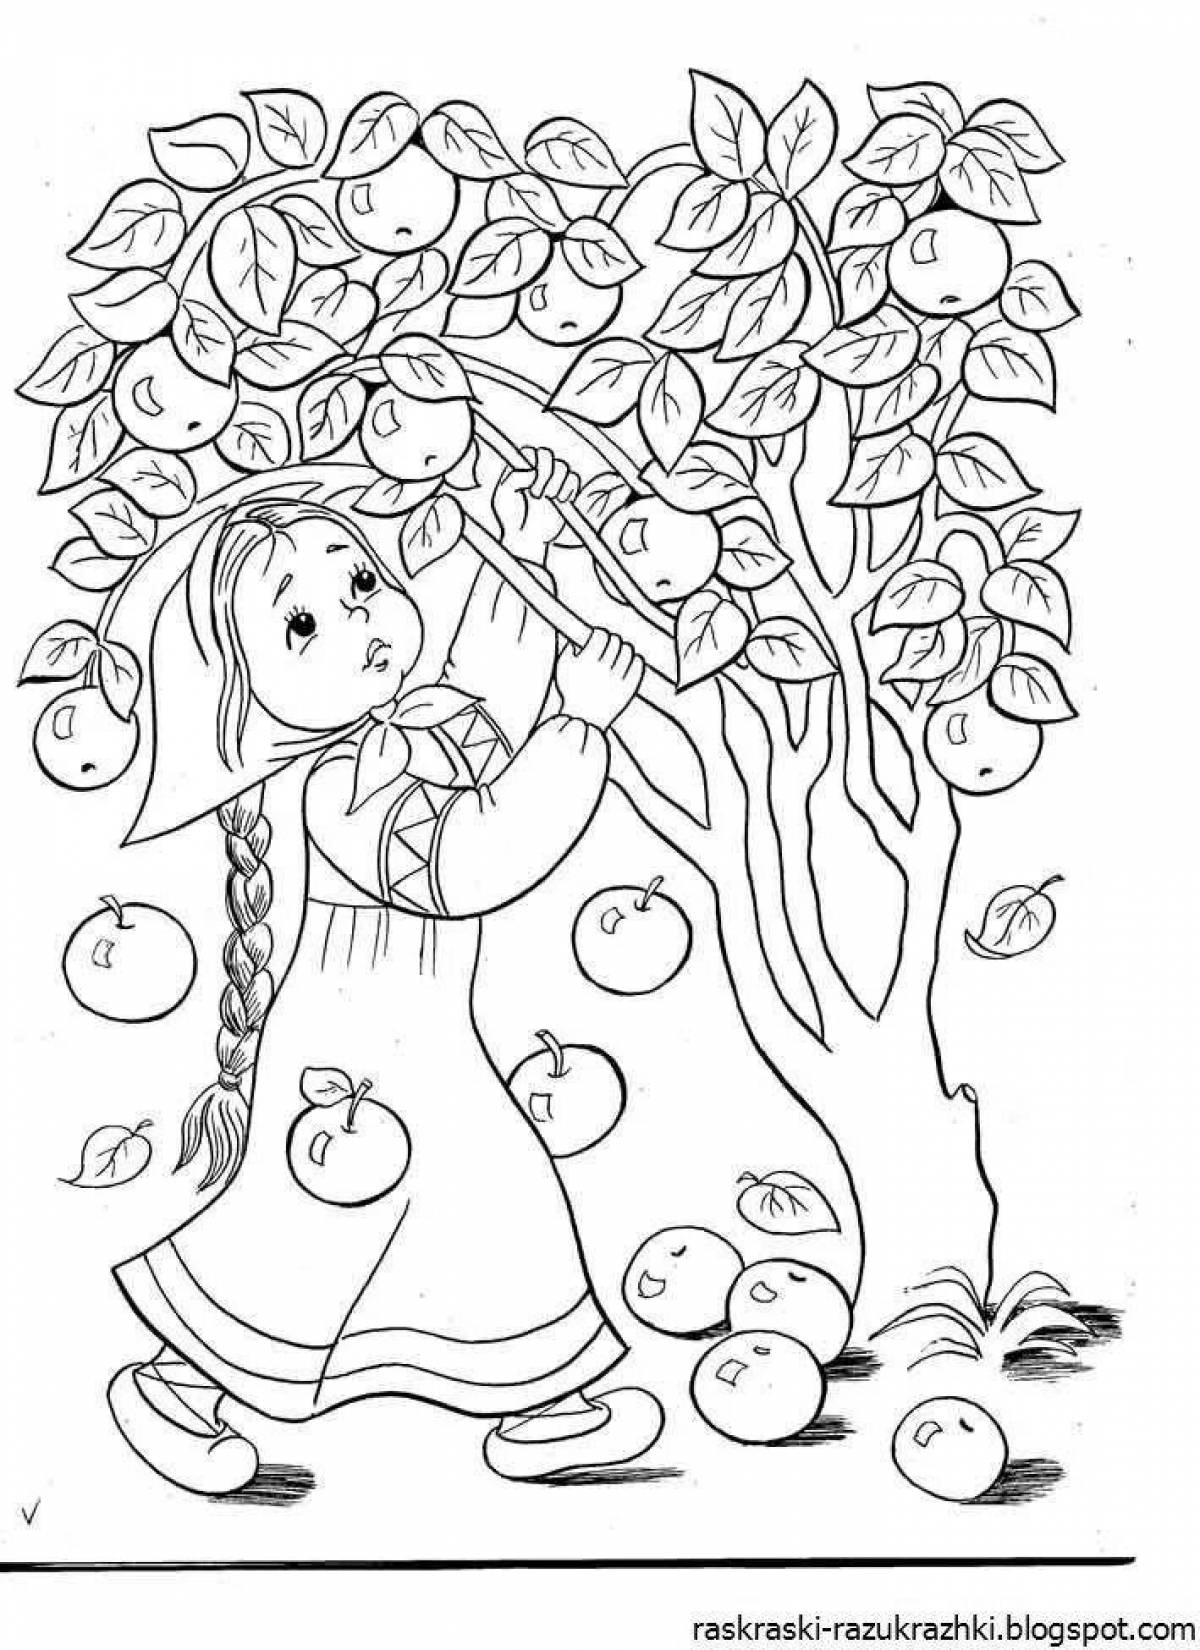 Invigorating fairy tale coloring pages